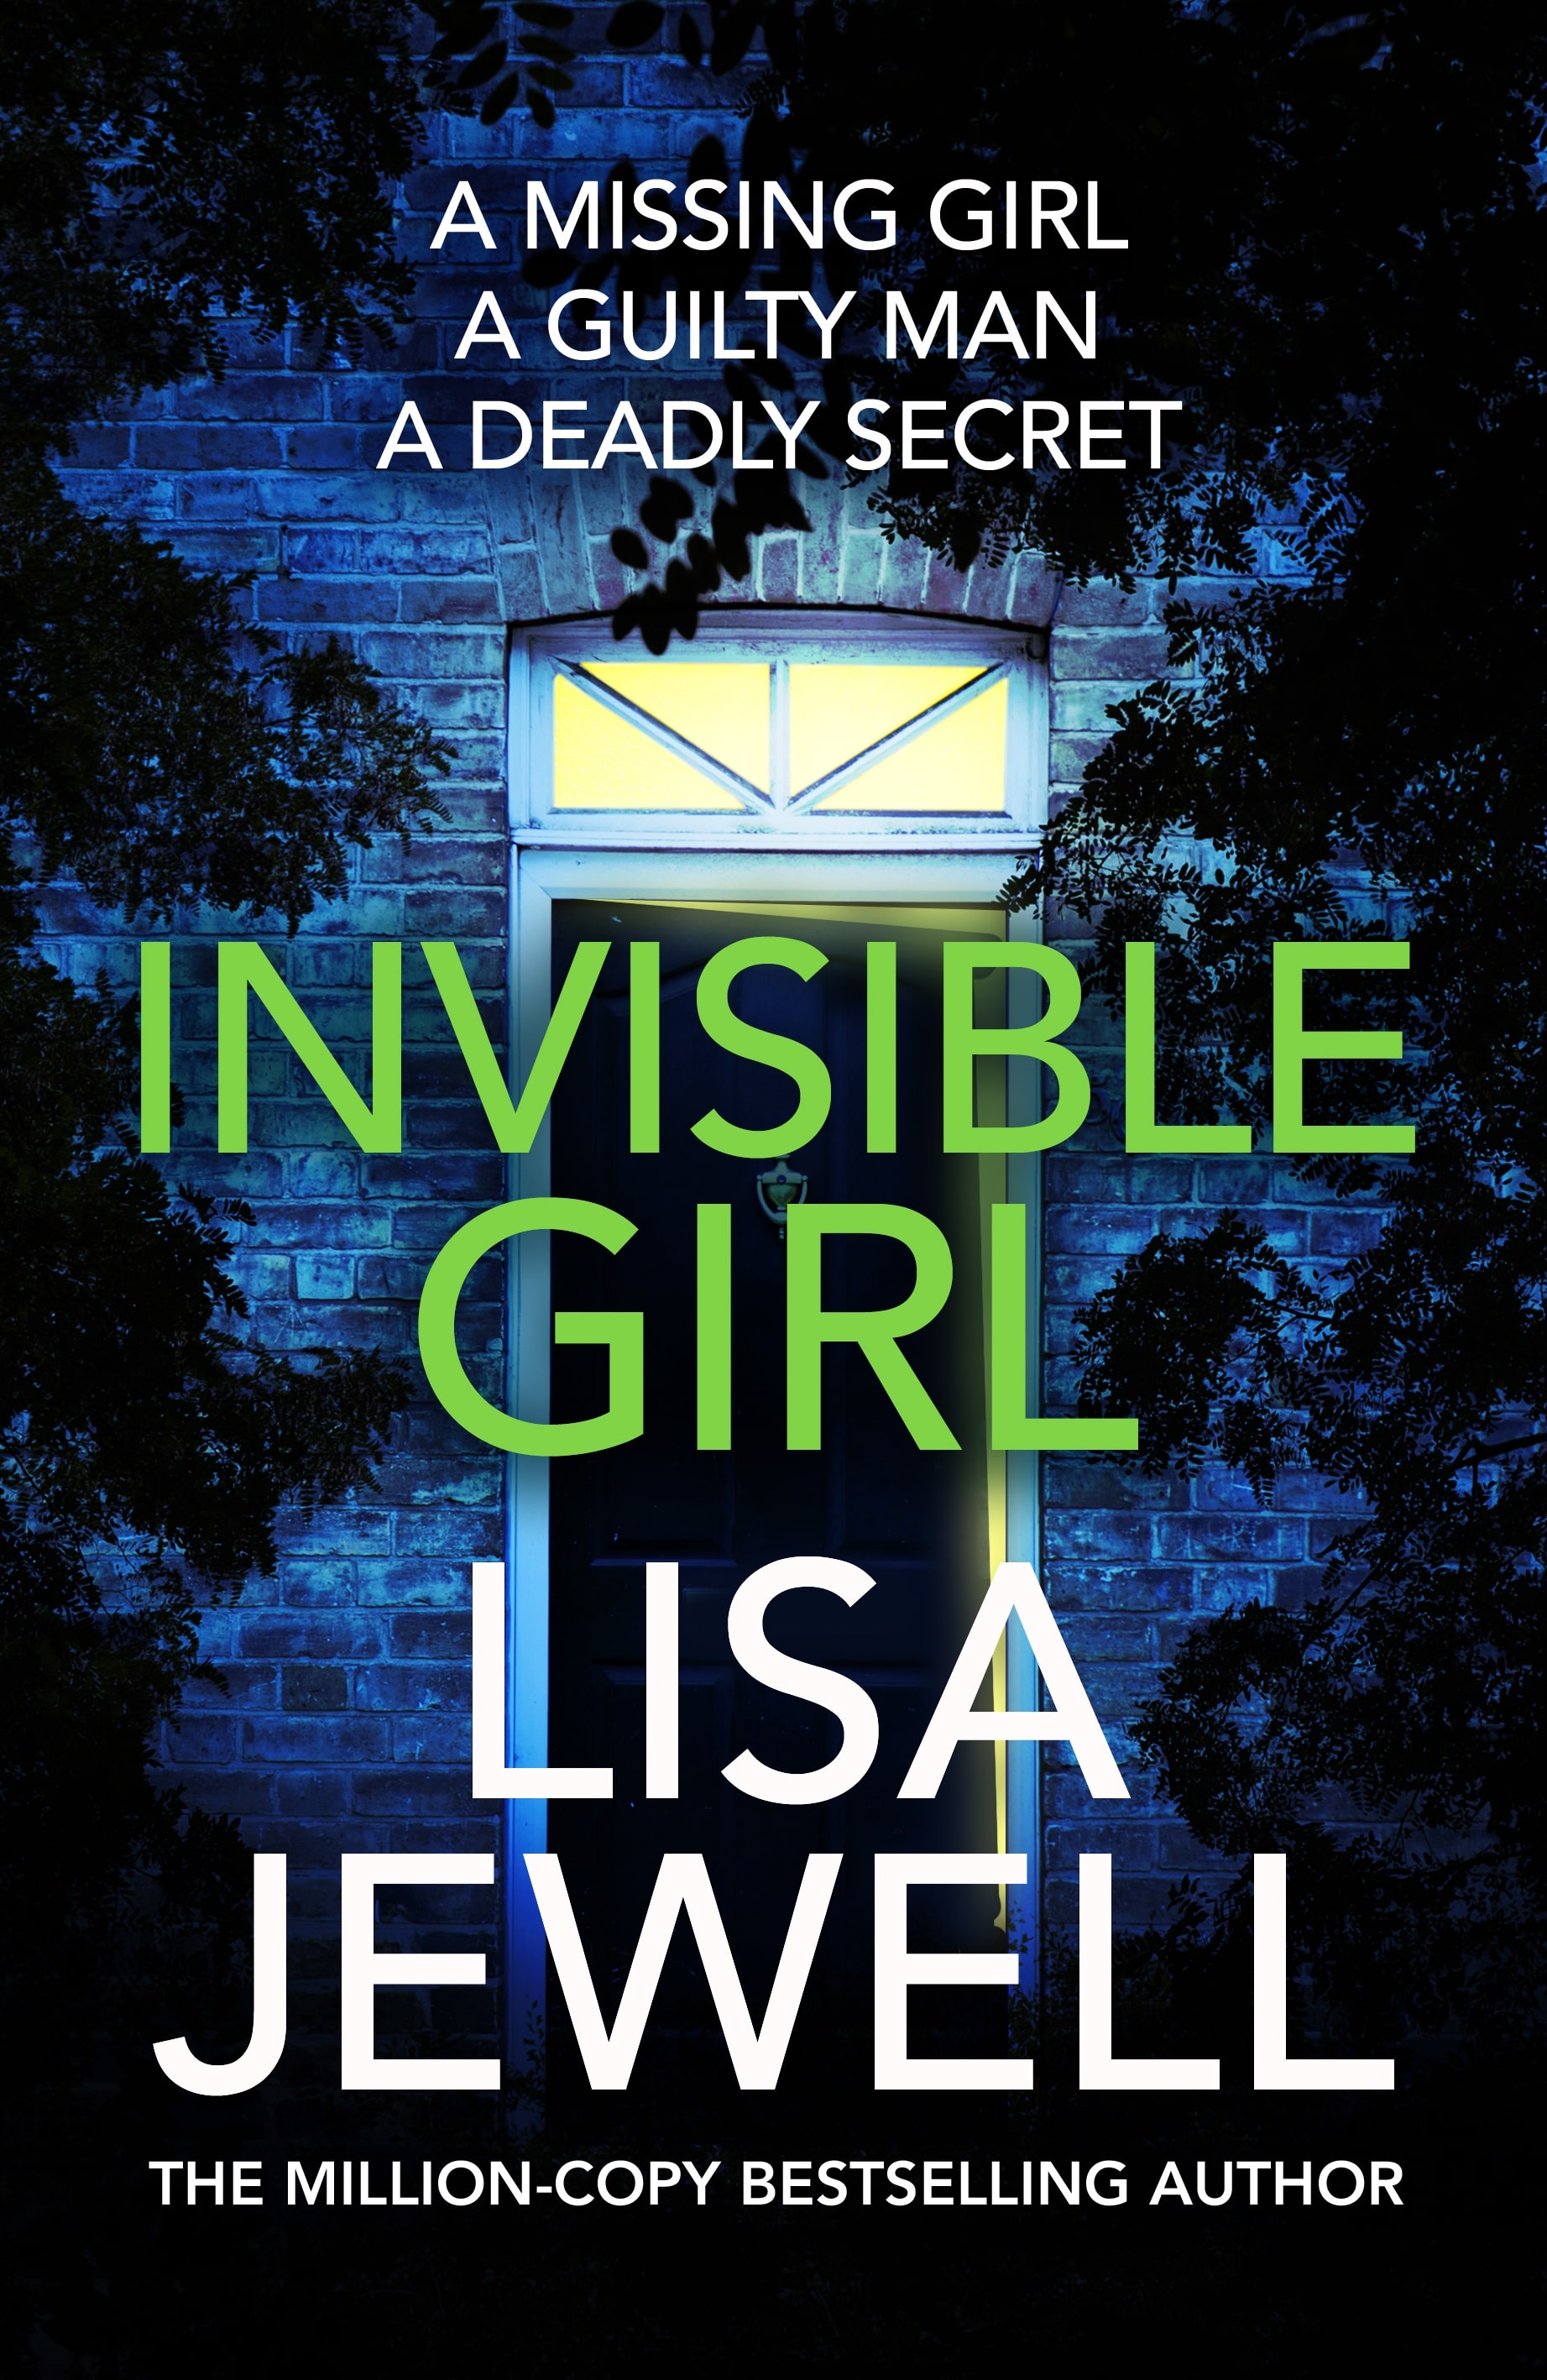 Book jacket of Invisible Girl by Lisa Jewell, one of the best paperback books out this month